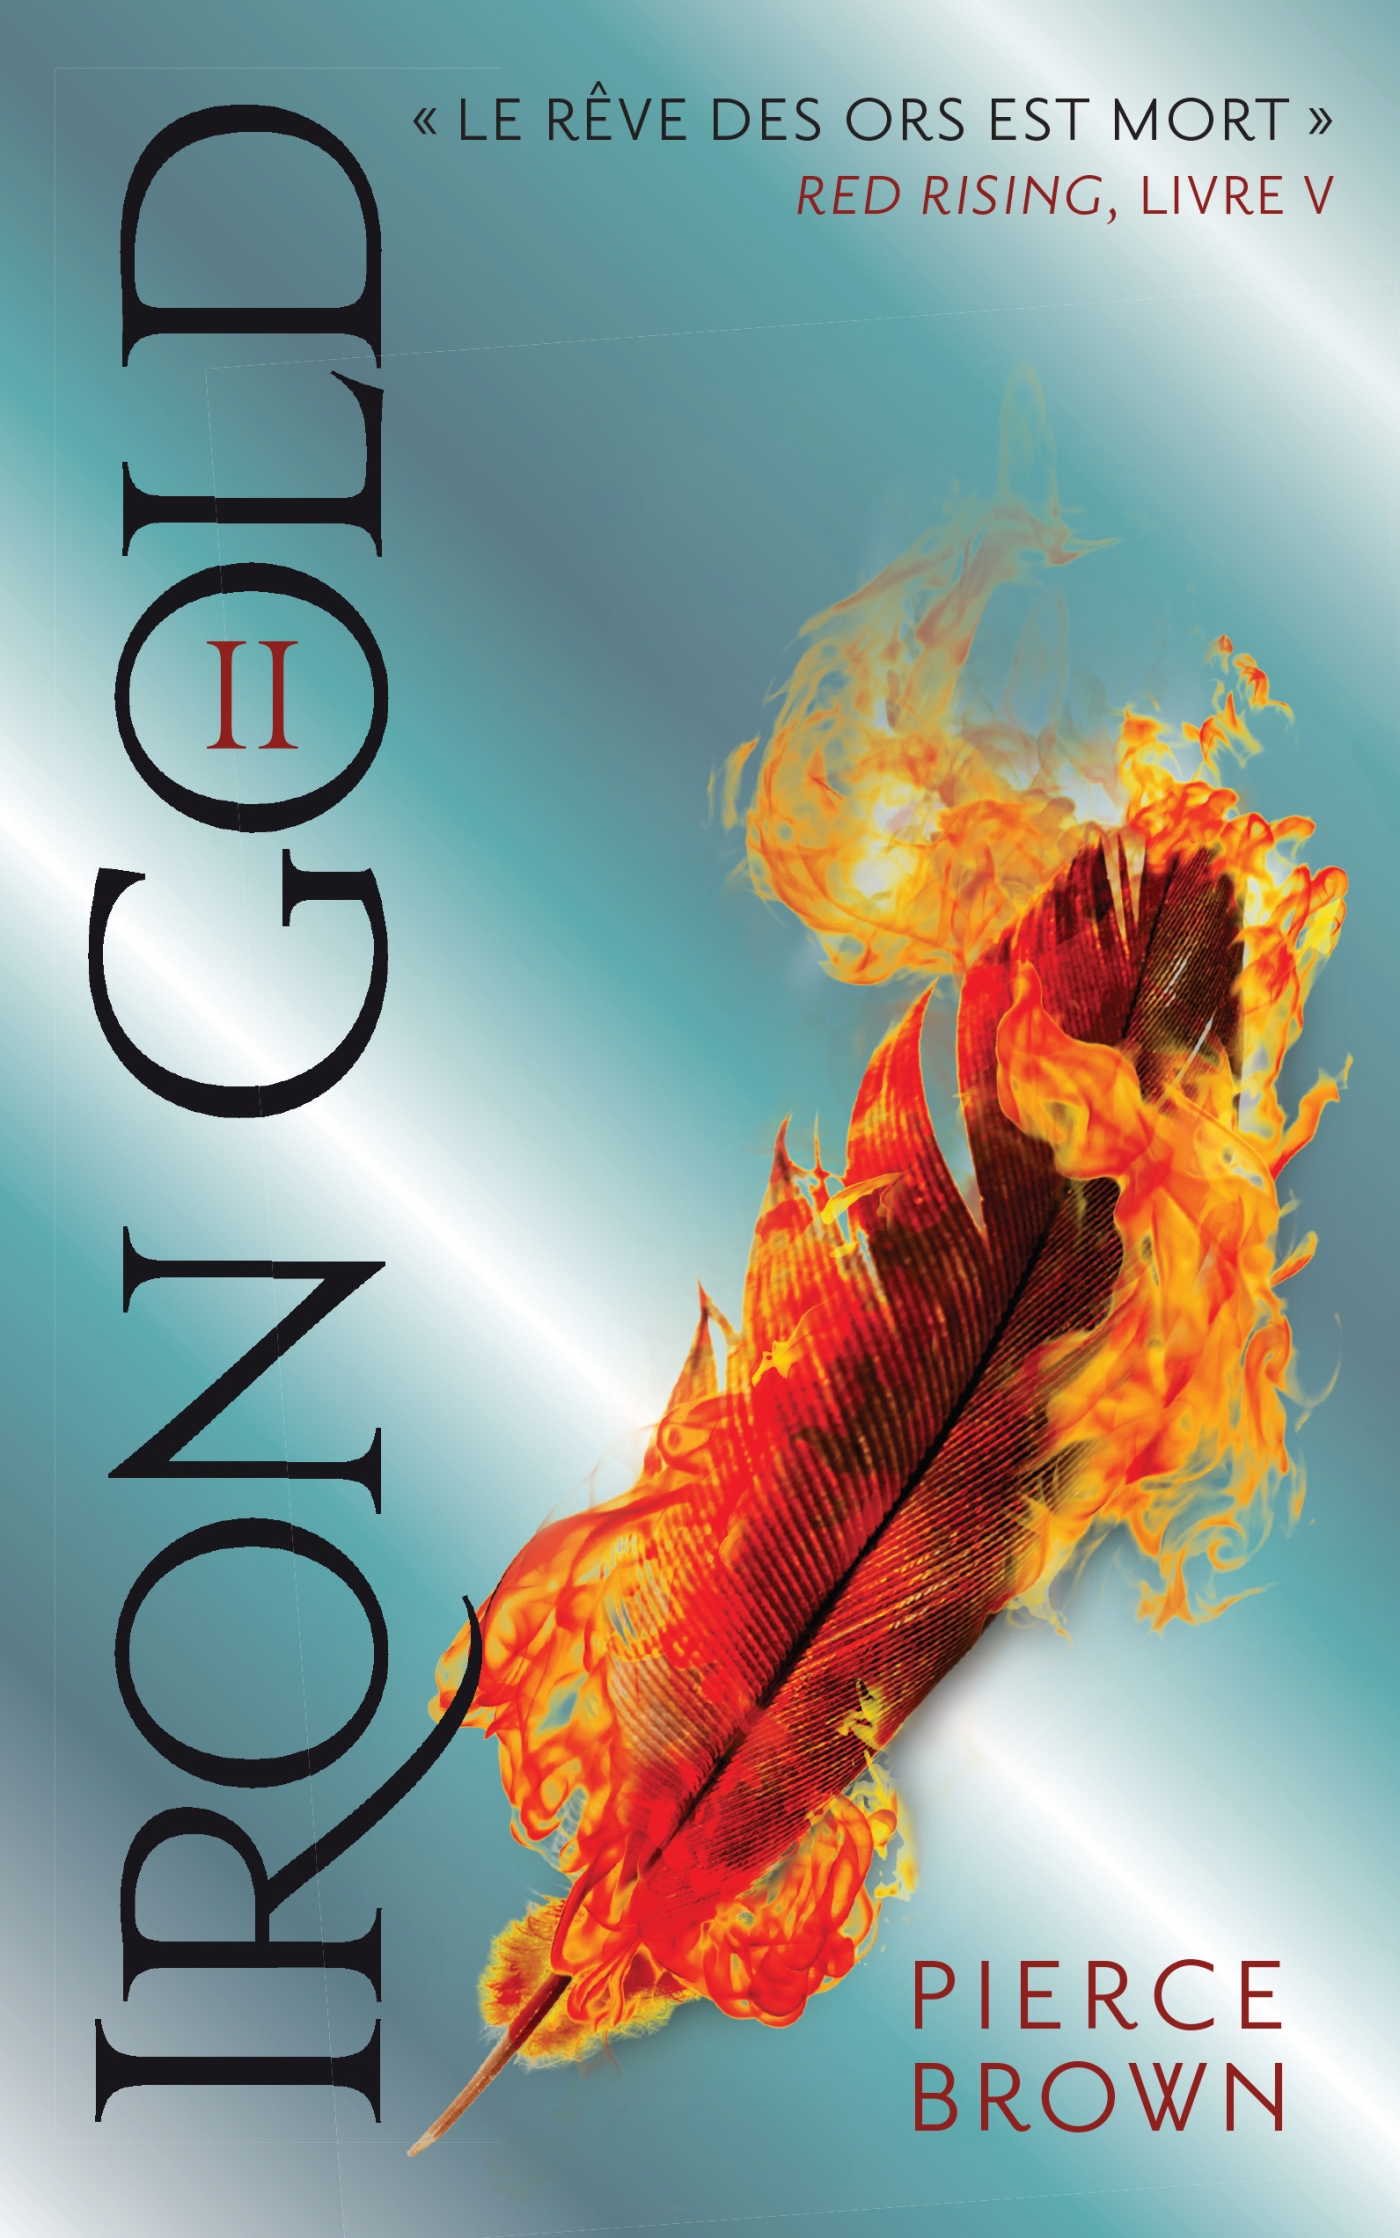 Red Rising - Livre 5 - Iron Gold - Partie 2